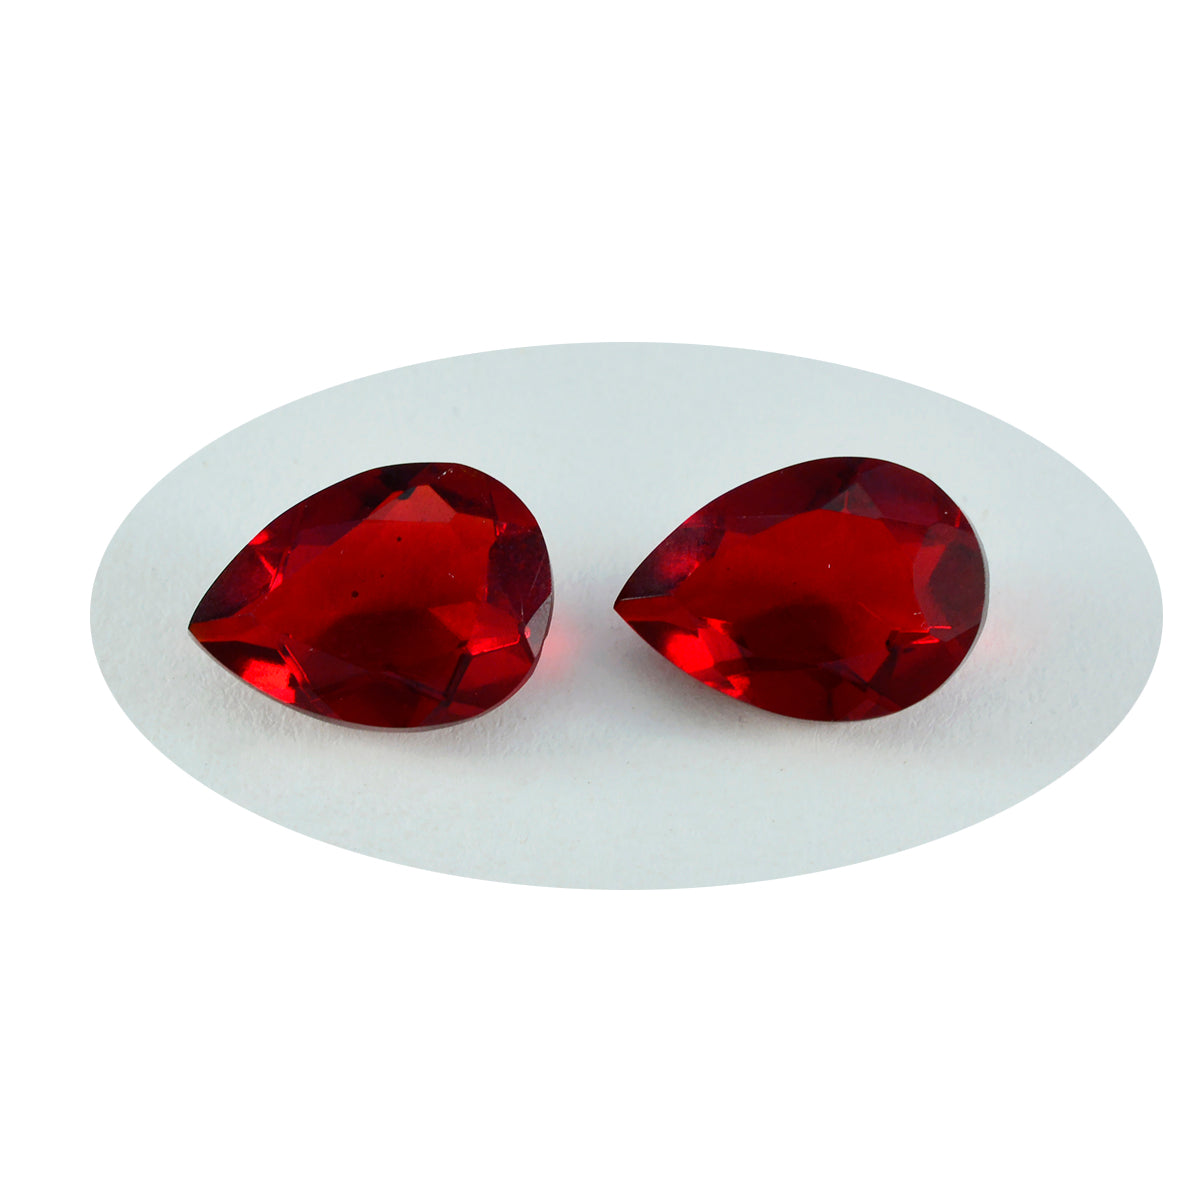 Riyogems 1PC Red Ruby CZ Faceted 10x14 mm Pear Shape A Quality Loose Stone